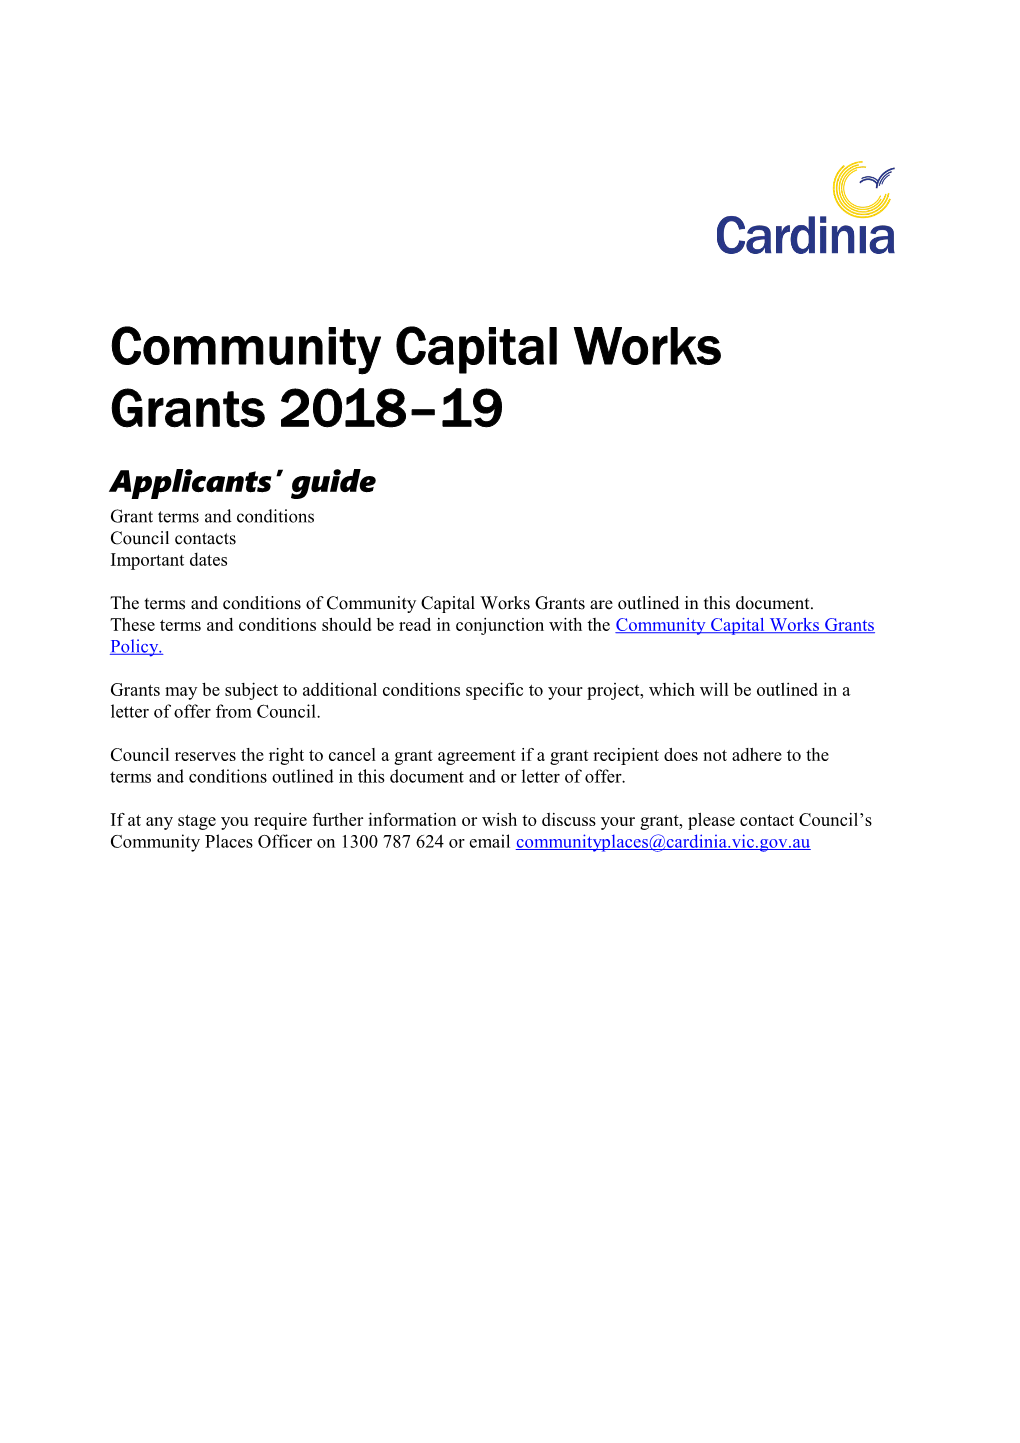 Community Capital Works Grants 2017 18 Terms and Conditions